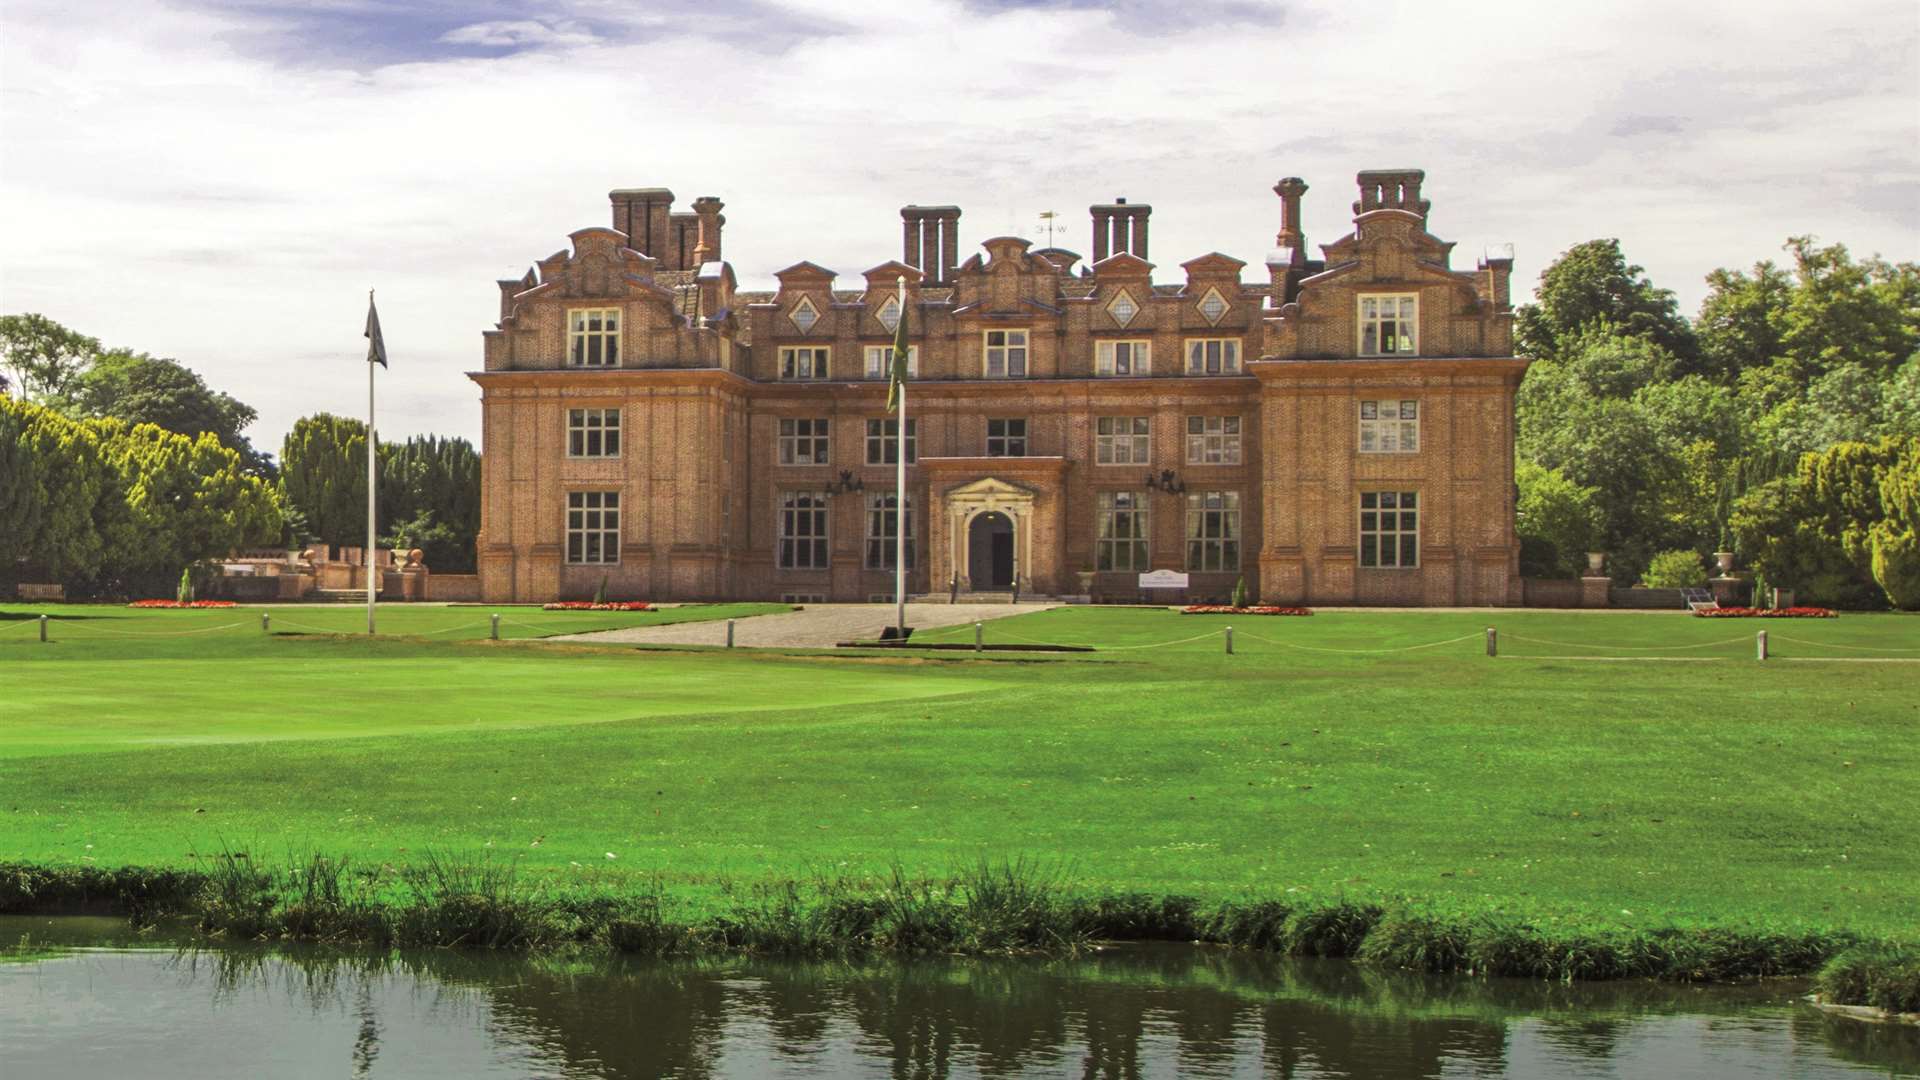 Broome Park mansion, formerly owned by Lord Kitchener, has been sold to an investor in Hong Kong after being marketed for £6 million